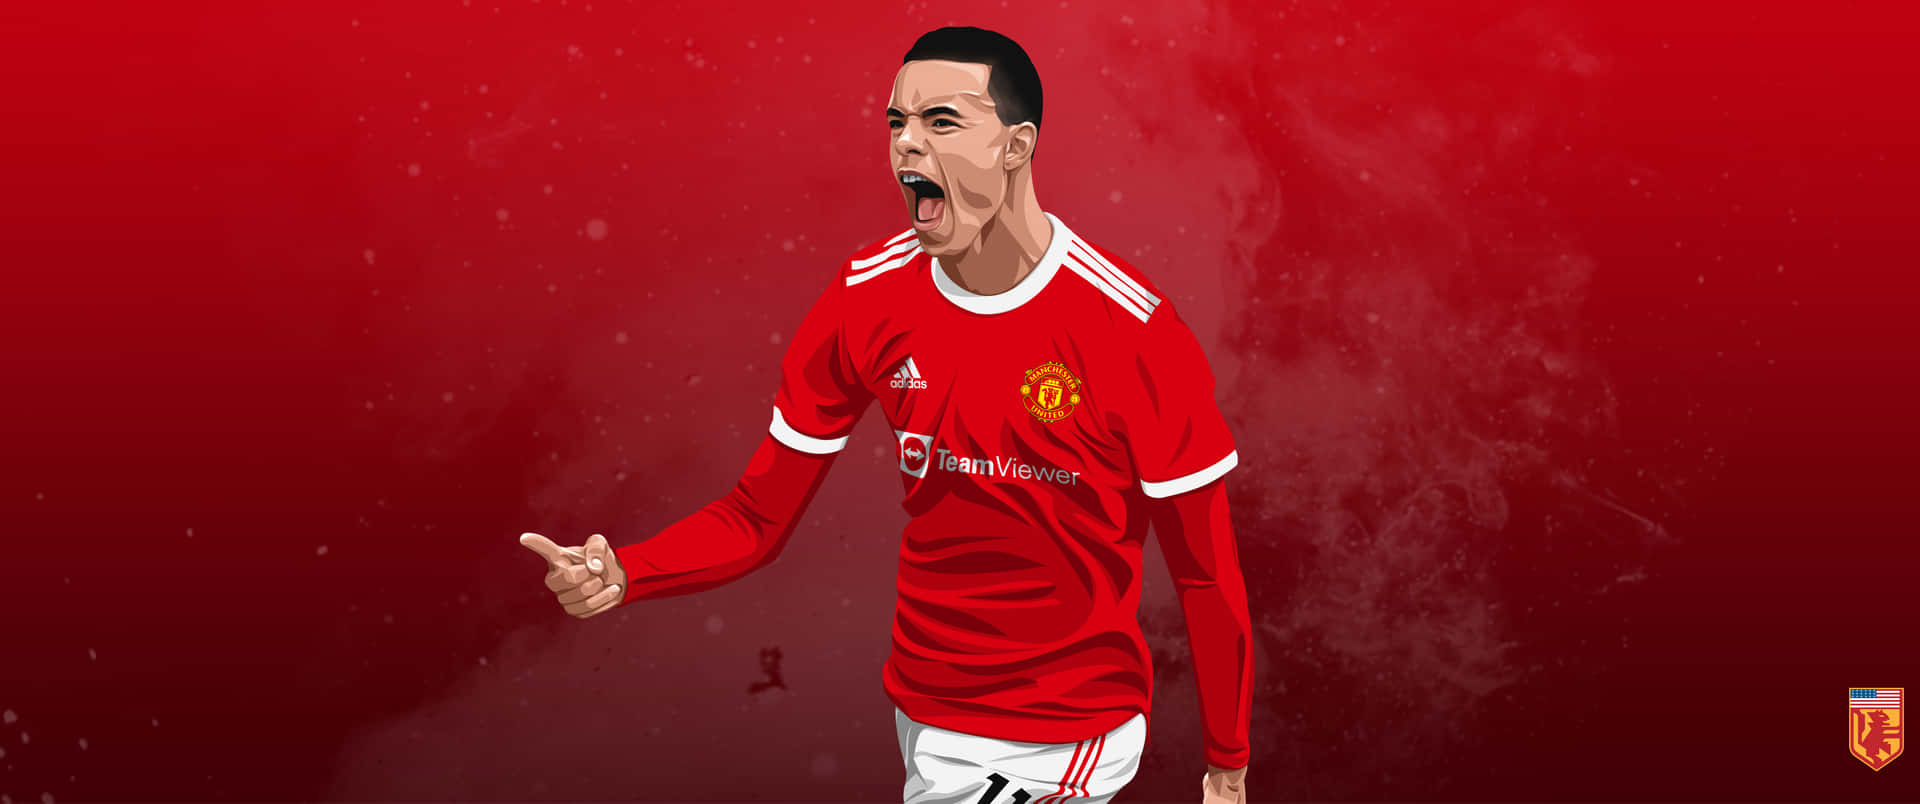 The Manchester United Football Club Red Devils in Action! Wallpaper